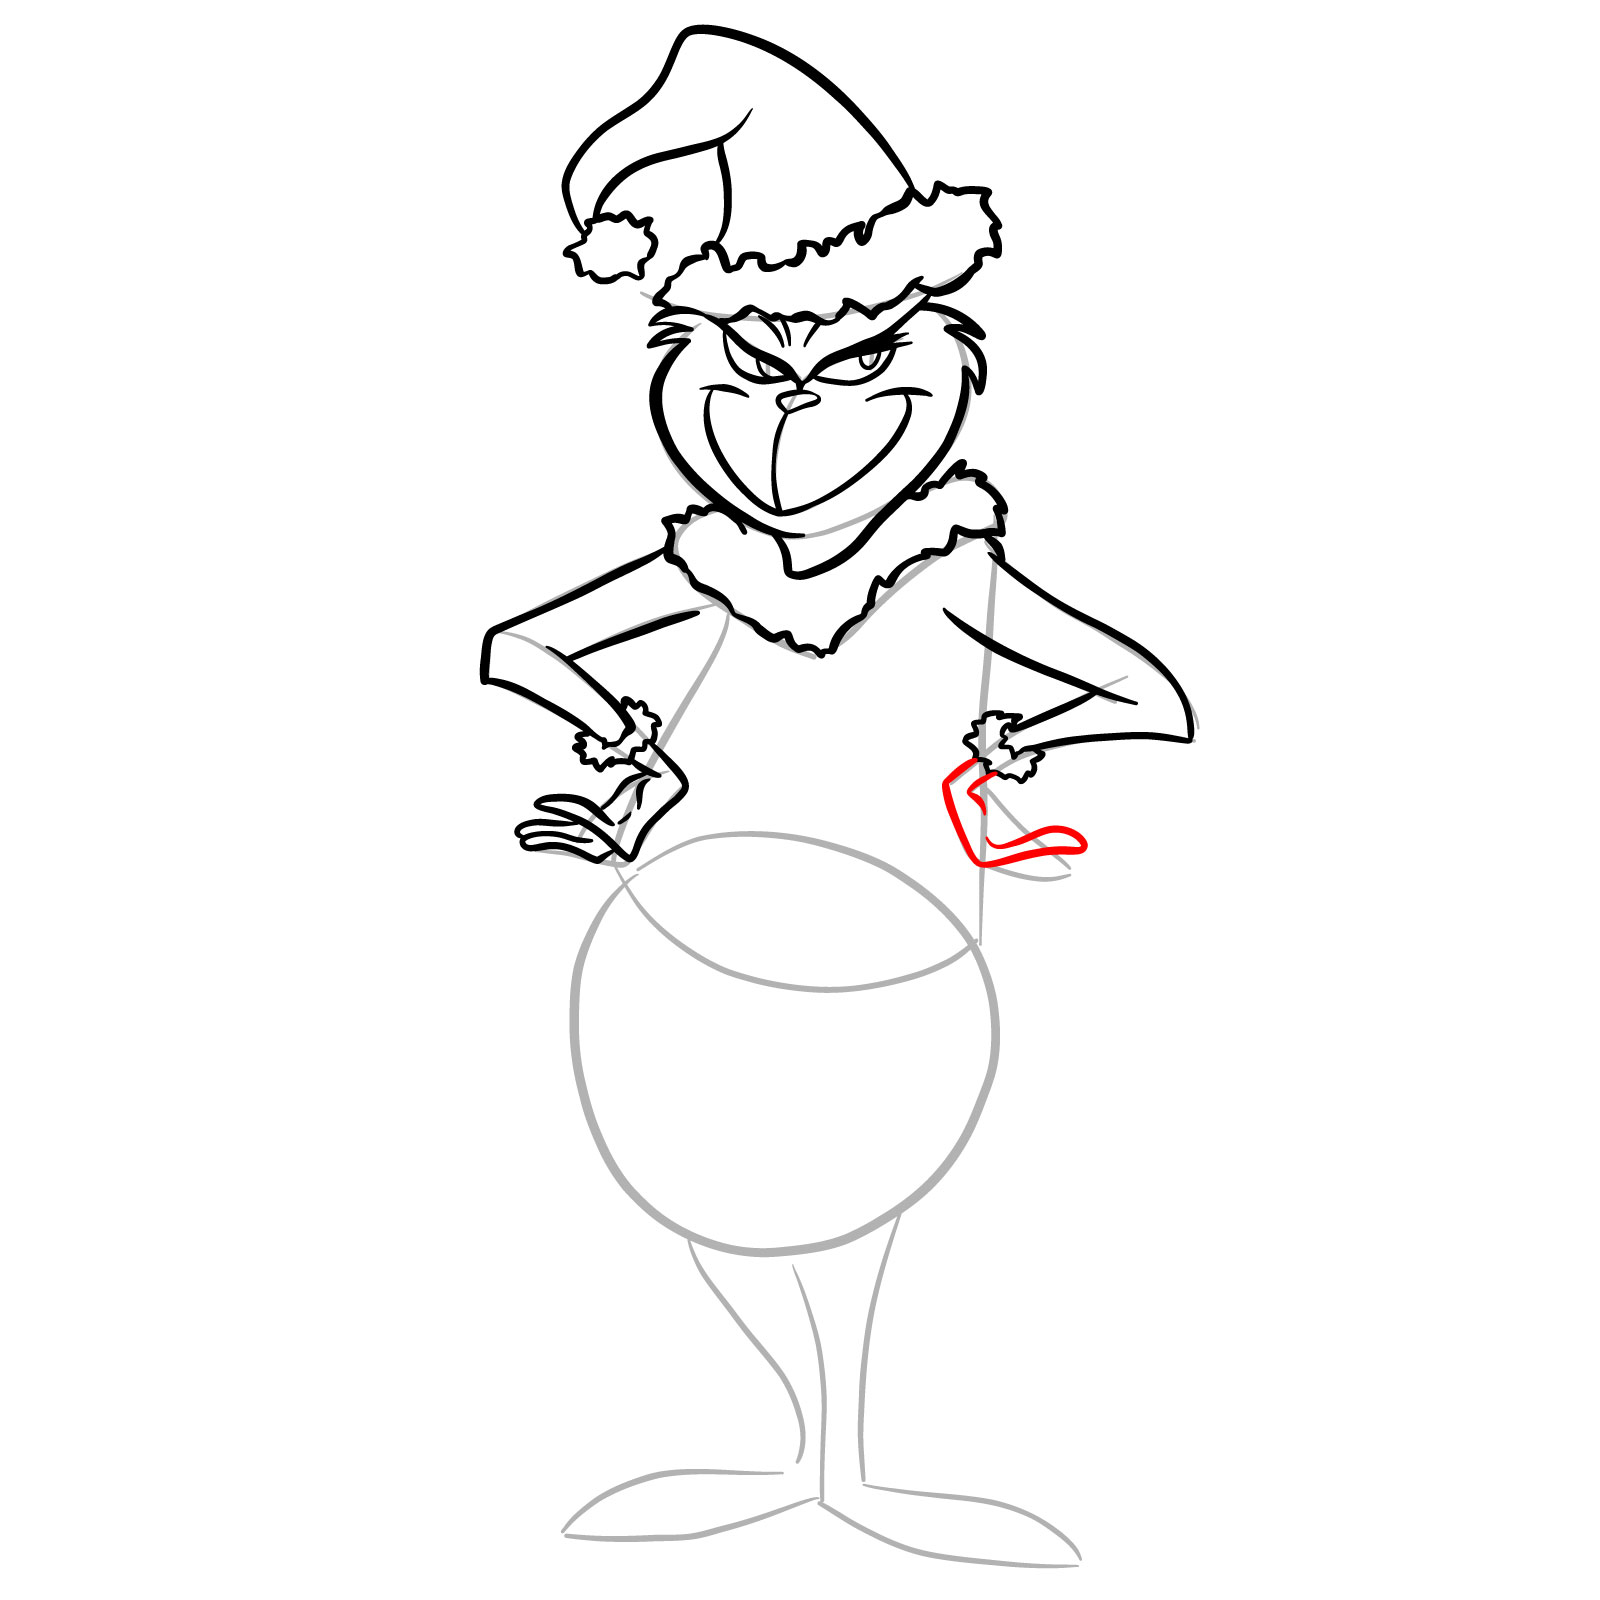 How to draw The Grinch in a Christmas costume - step 19